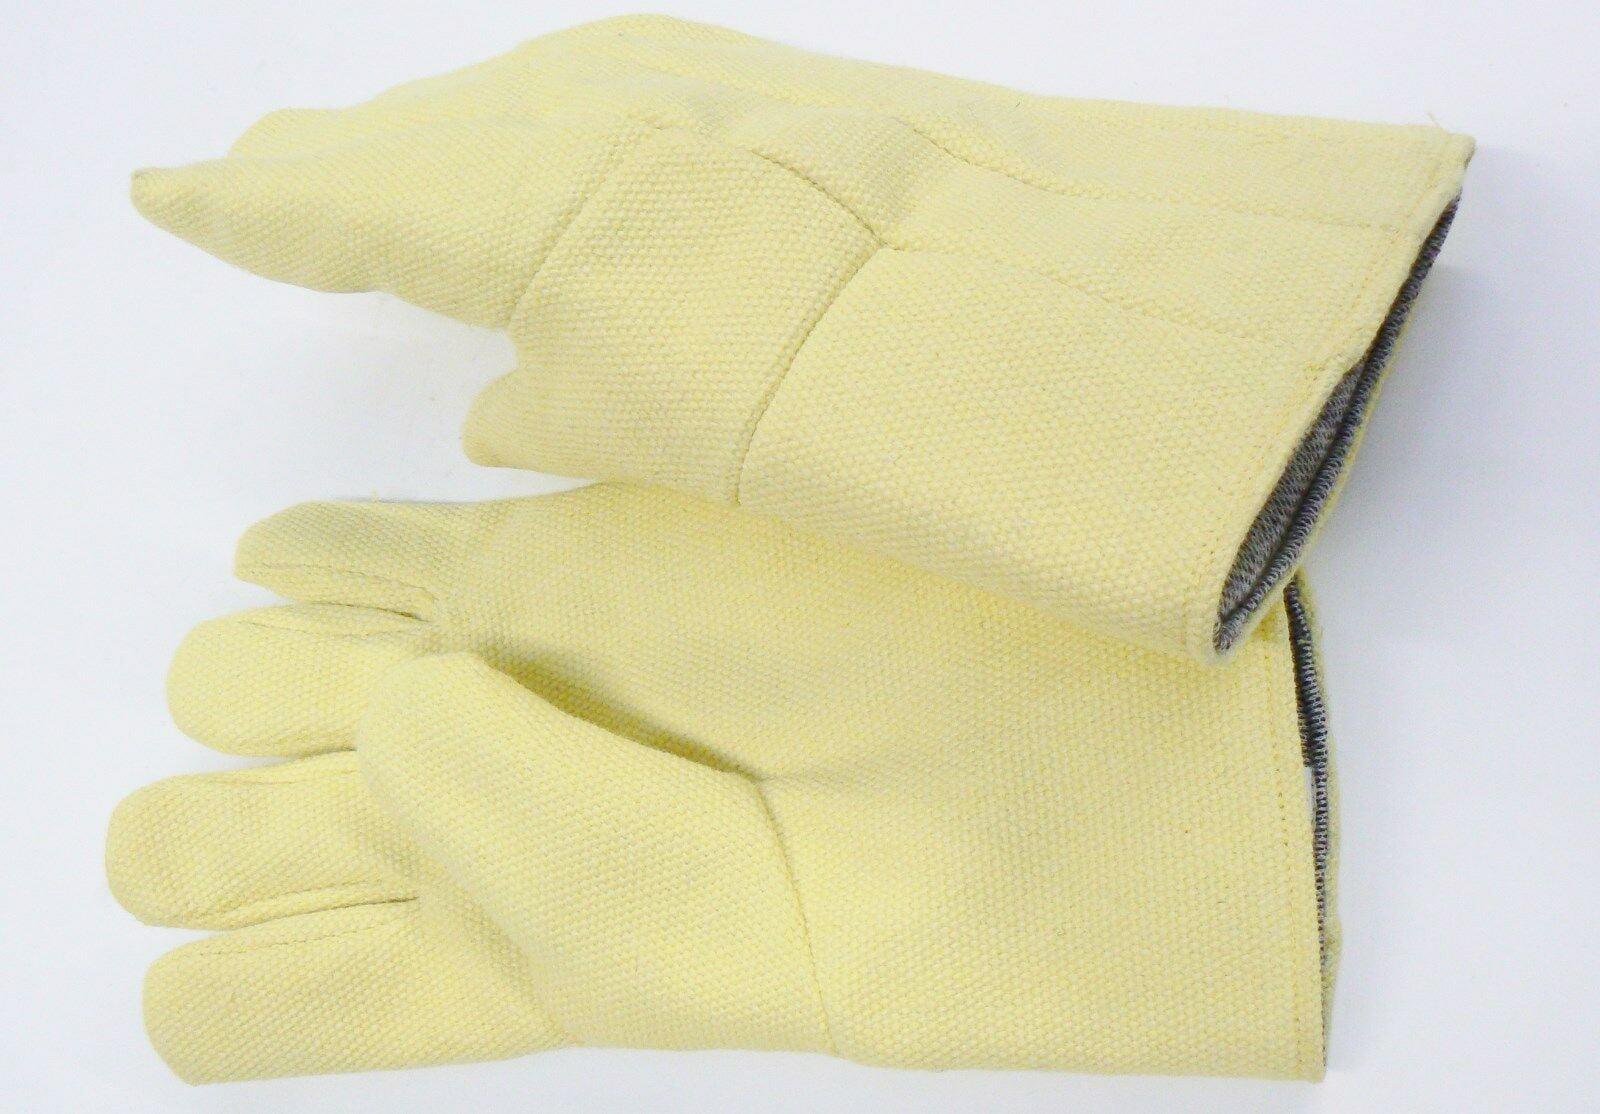 Craft Supplies & Tools MADE WITH KEVLAR High Heat Resistant Gloves Furnace 14" Pair Melting Welding 